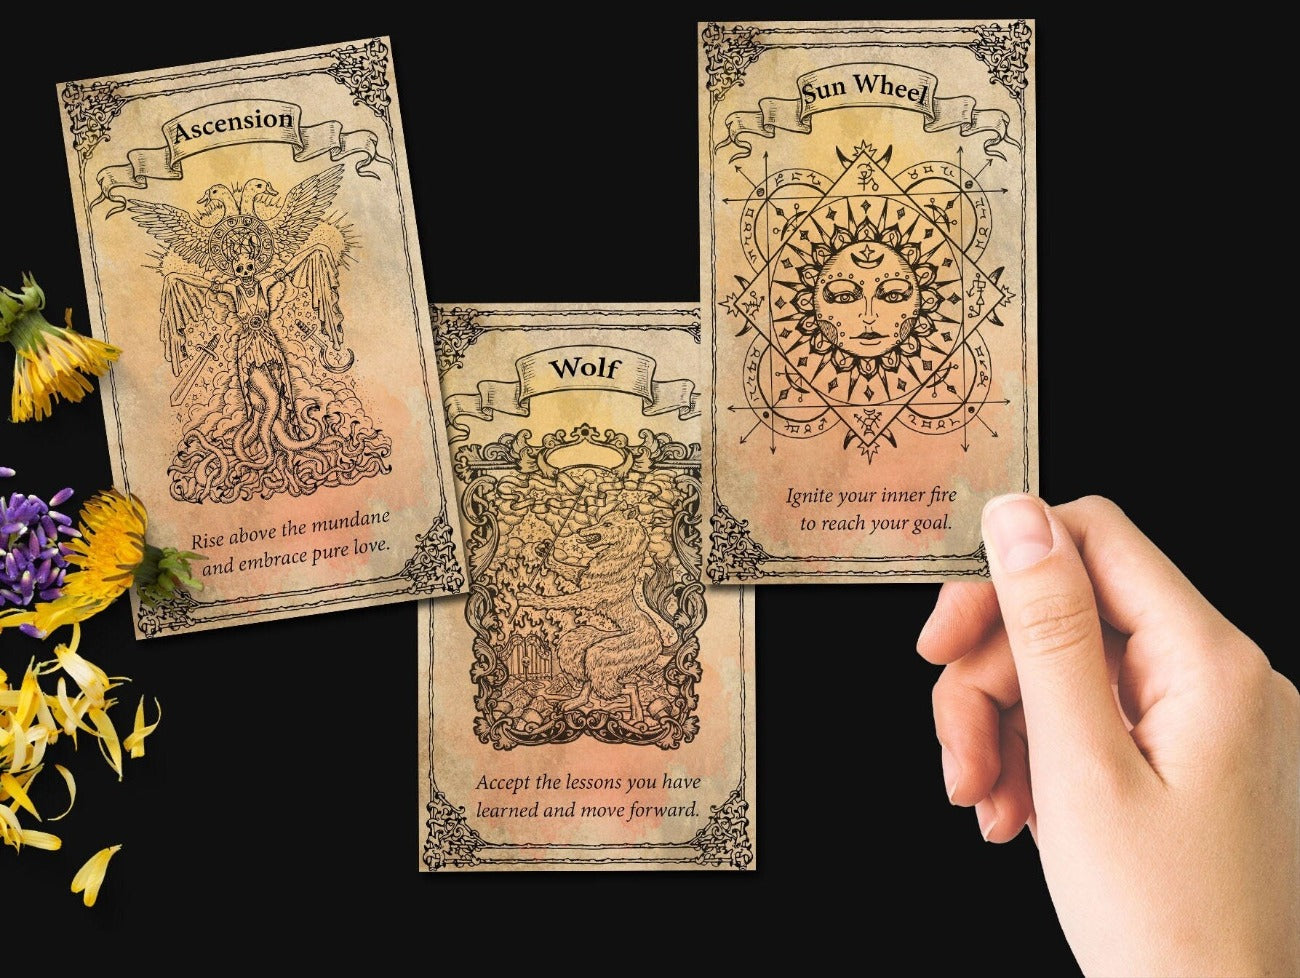 20 Mabon Sabbat Oracle Cards with Celtic borders, assorted Mabon related pictures with inspirational text.